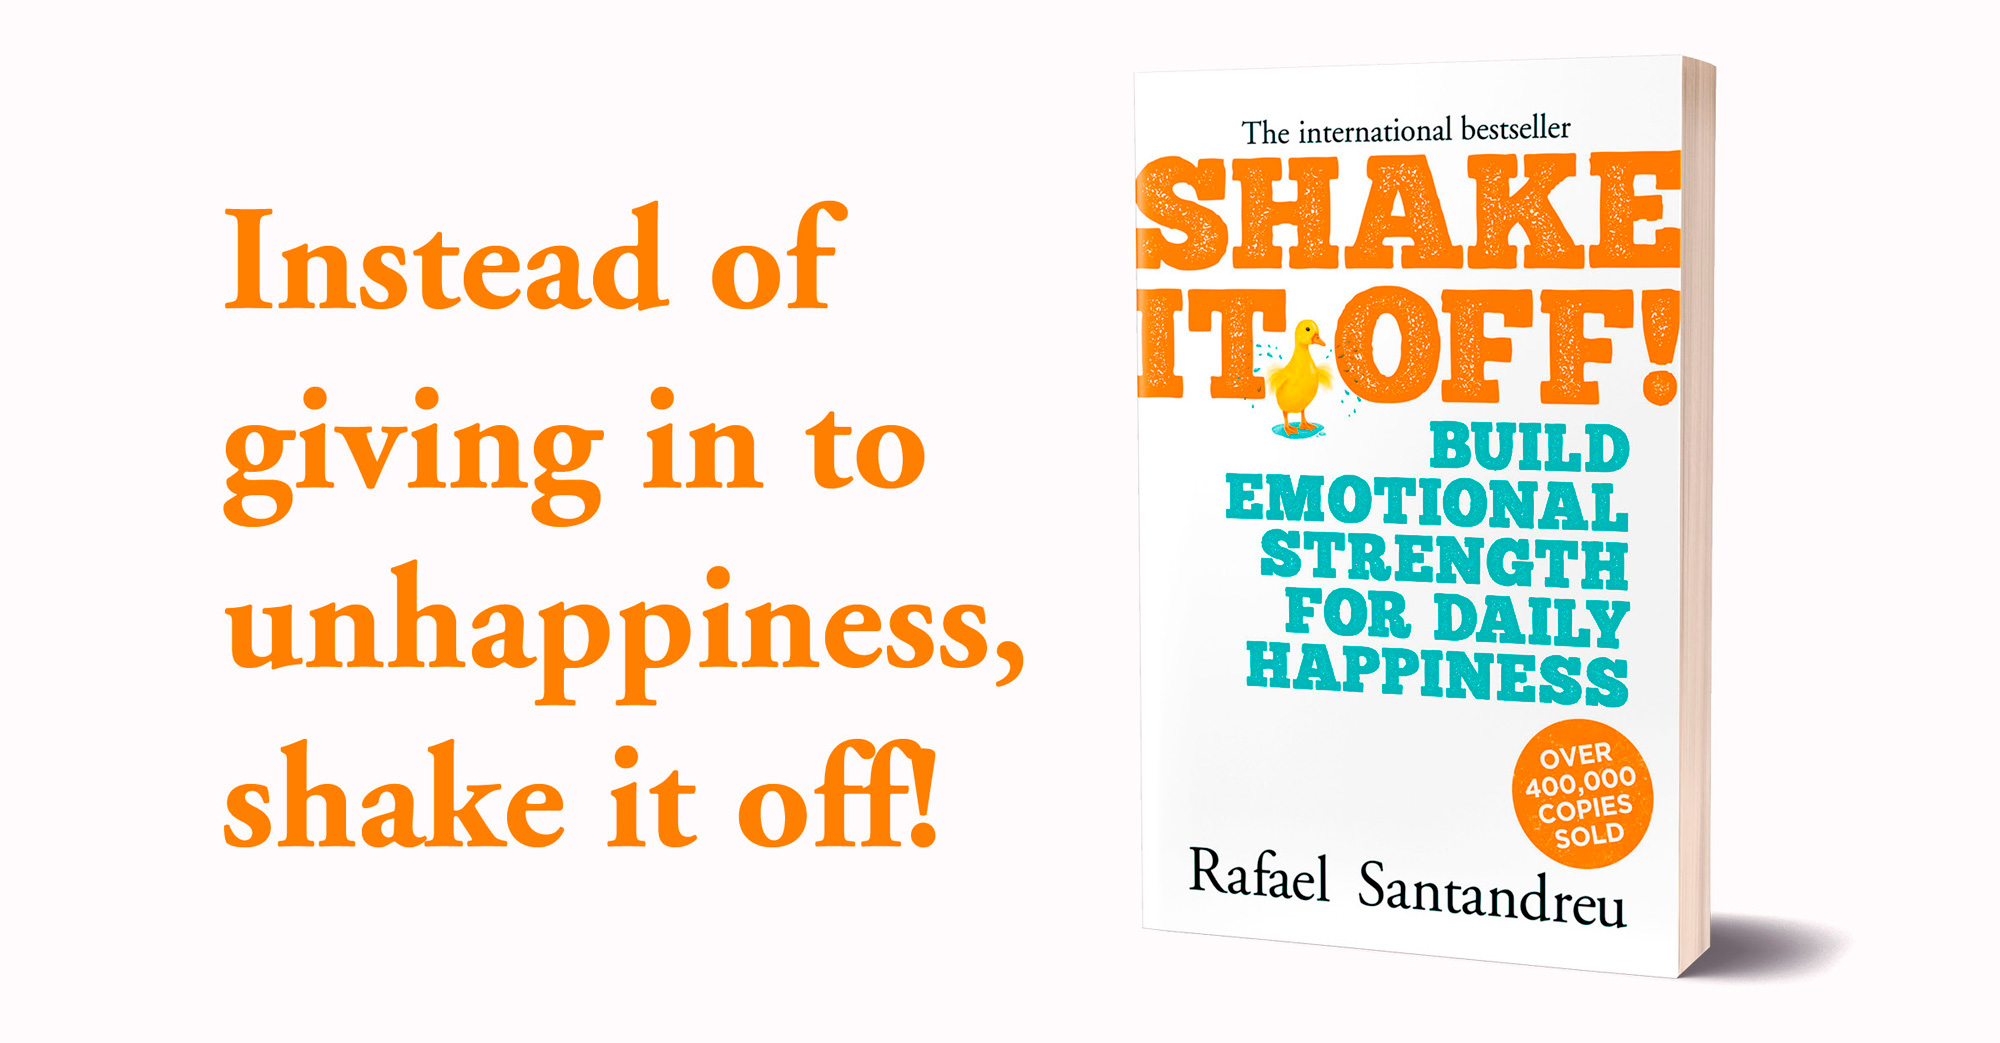 Instead of giving in to unhappiness, shake it off!